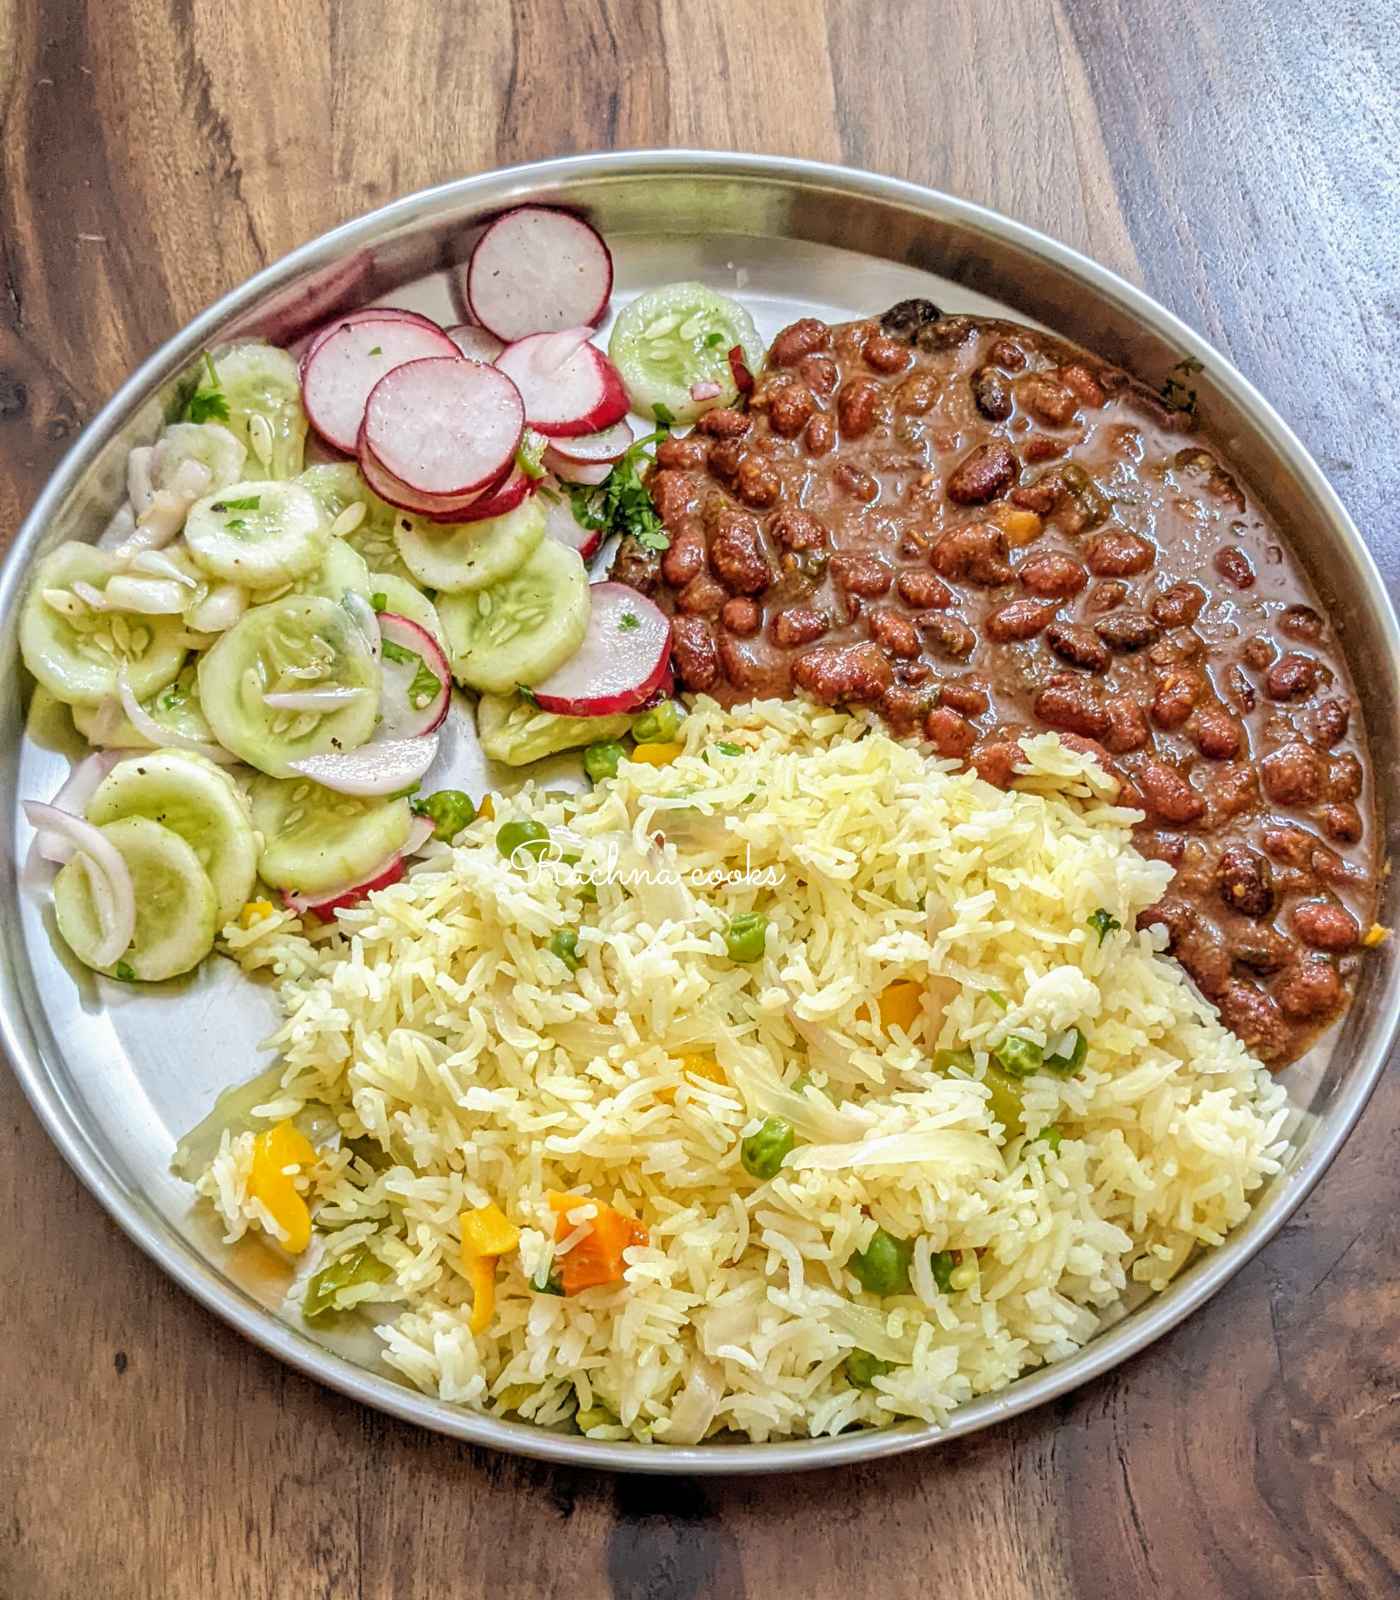 Vegetable pulao served with rajma curry and salad.